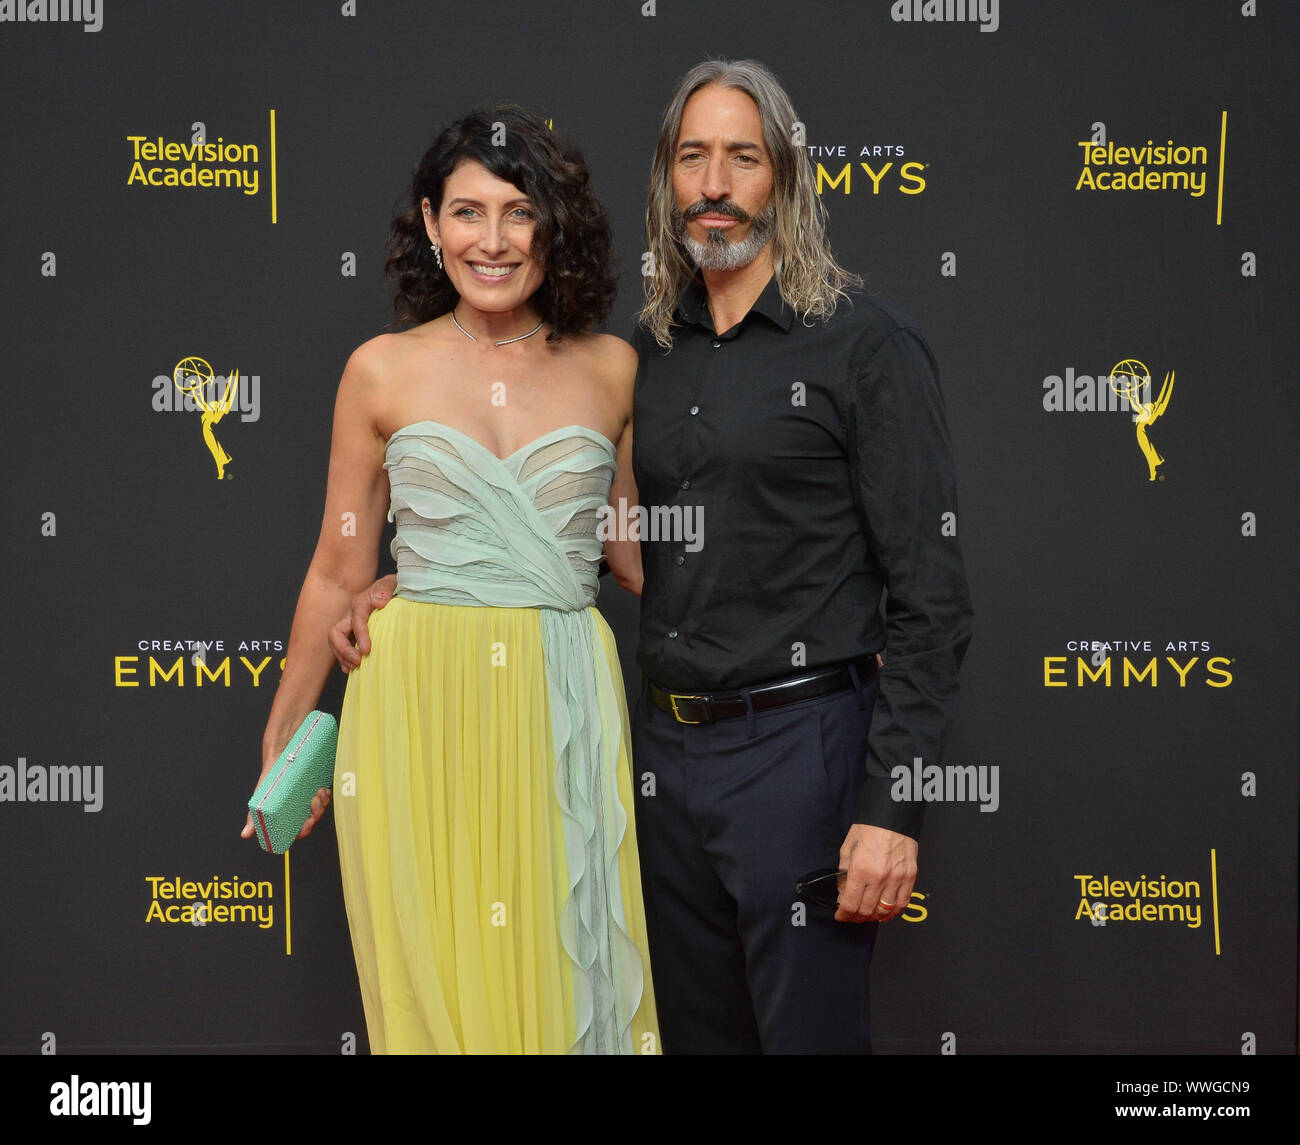 Los Angeles, United States. 15th Sep, 2019. Actress Lisa Edelstein and her husband, American artist Robert Russell attend the Creative Arts Emmy Awards at the Microsoft Theater in Los Angeles on Sunday, September 15, 2019. Photo by Jim Ruymen/UPI Credit: UPI/Alamy Live News Stock Photo